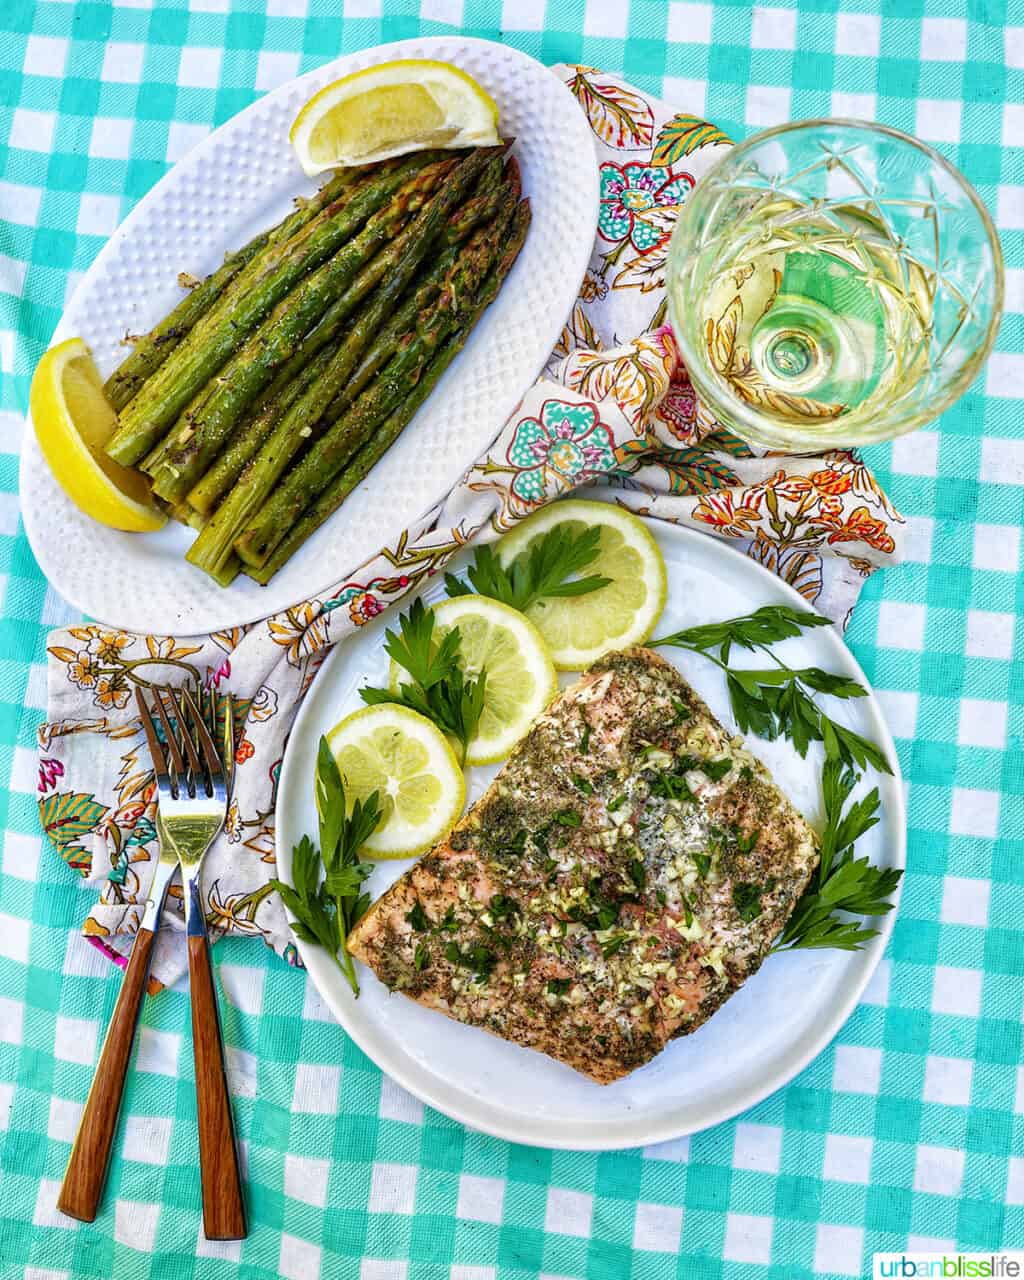 plate with grilled asparagus and lemon next to lemon slices and plate of grilled salmon with lemon and herbs, glass of white wine, forks, all on an aqua checkered tablecloth.